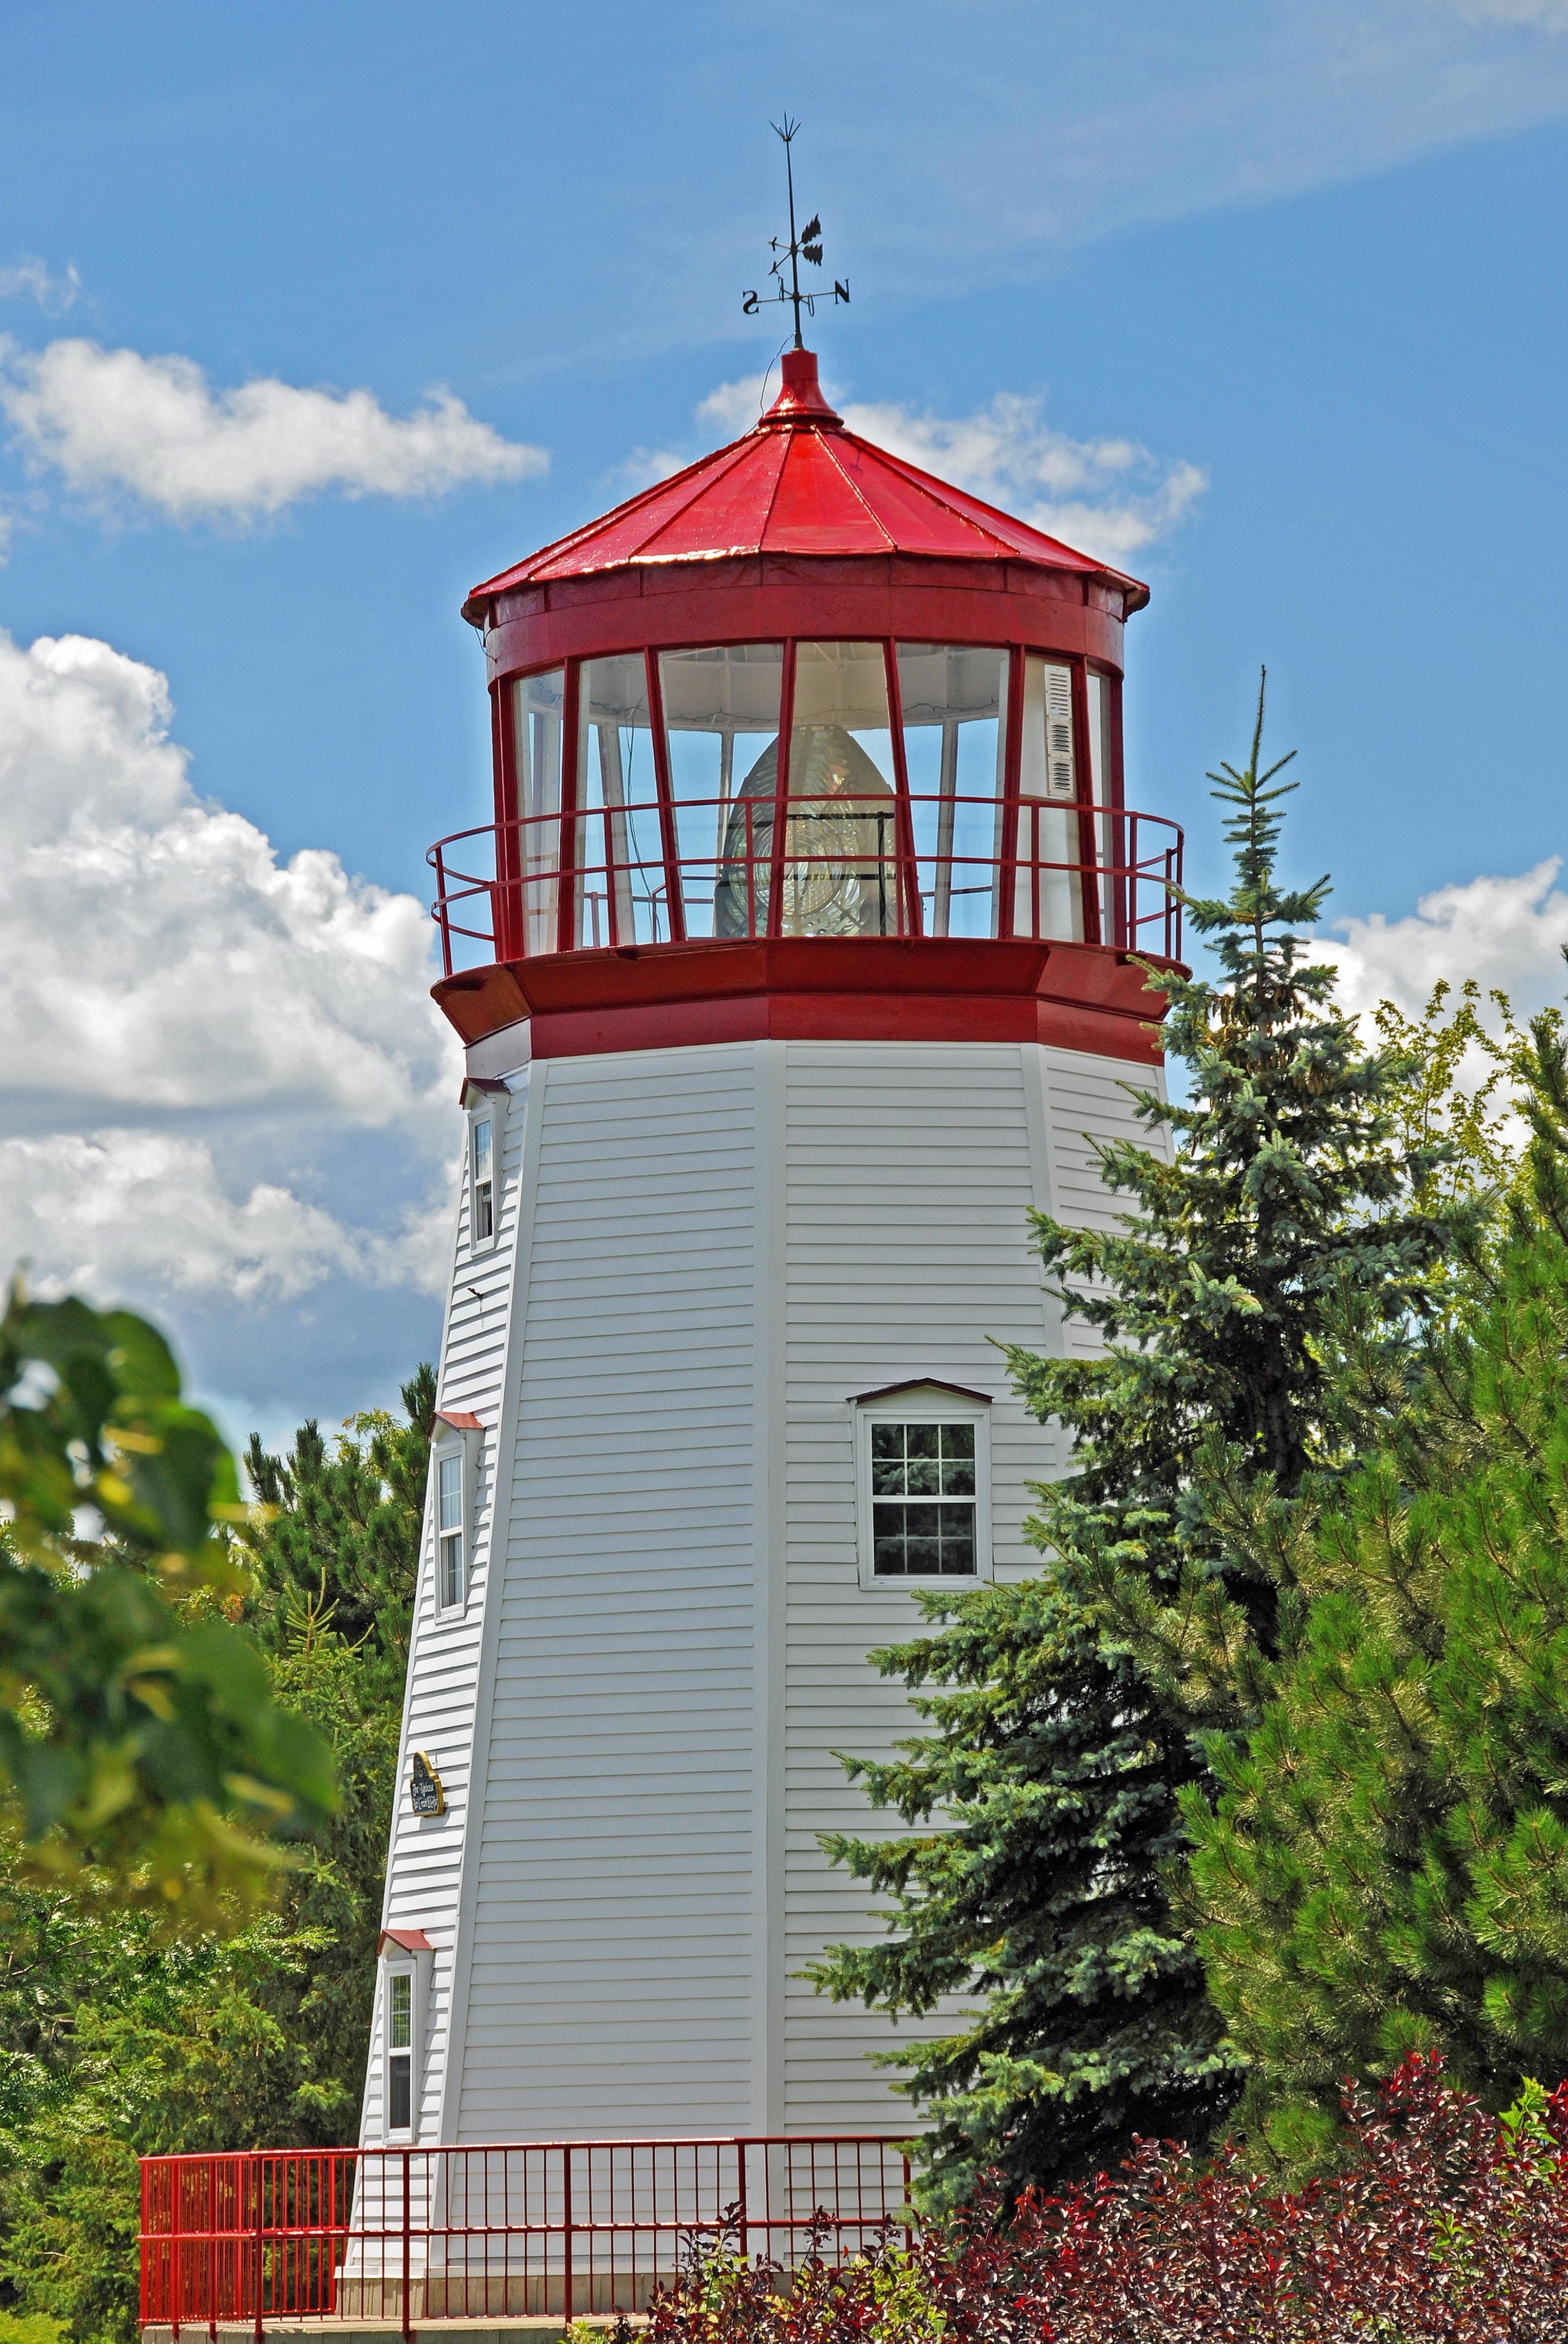 Photograph of a large white lighthouse with a red top, surrounded by greenery and a blue sky.